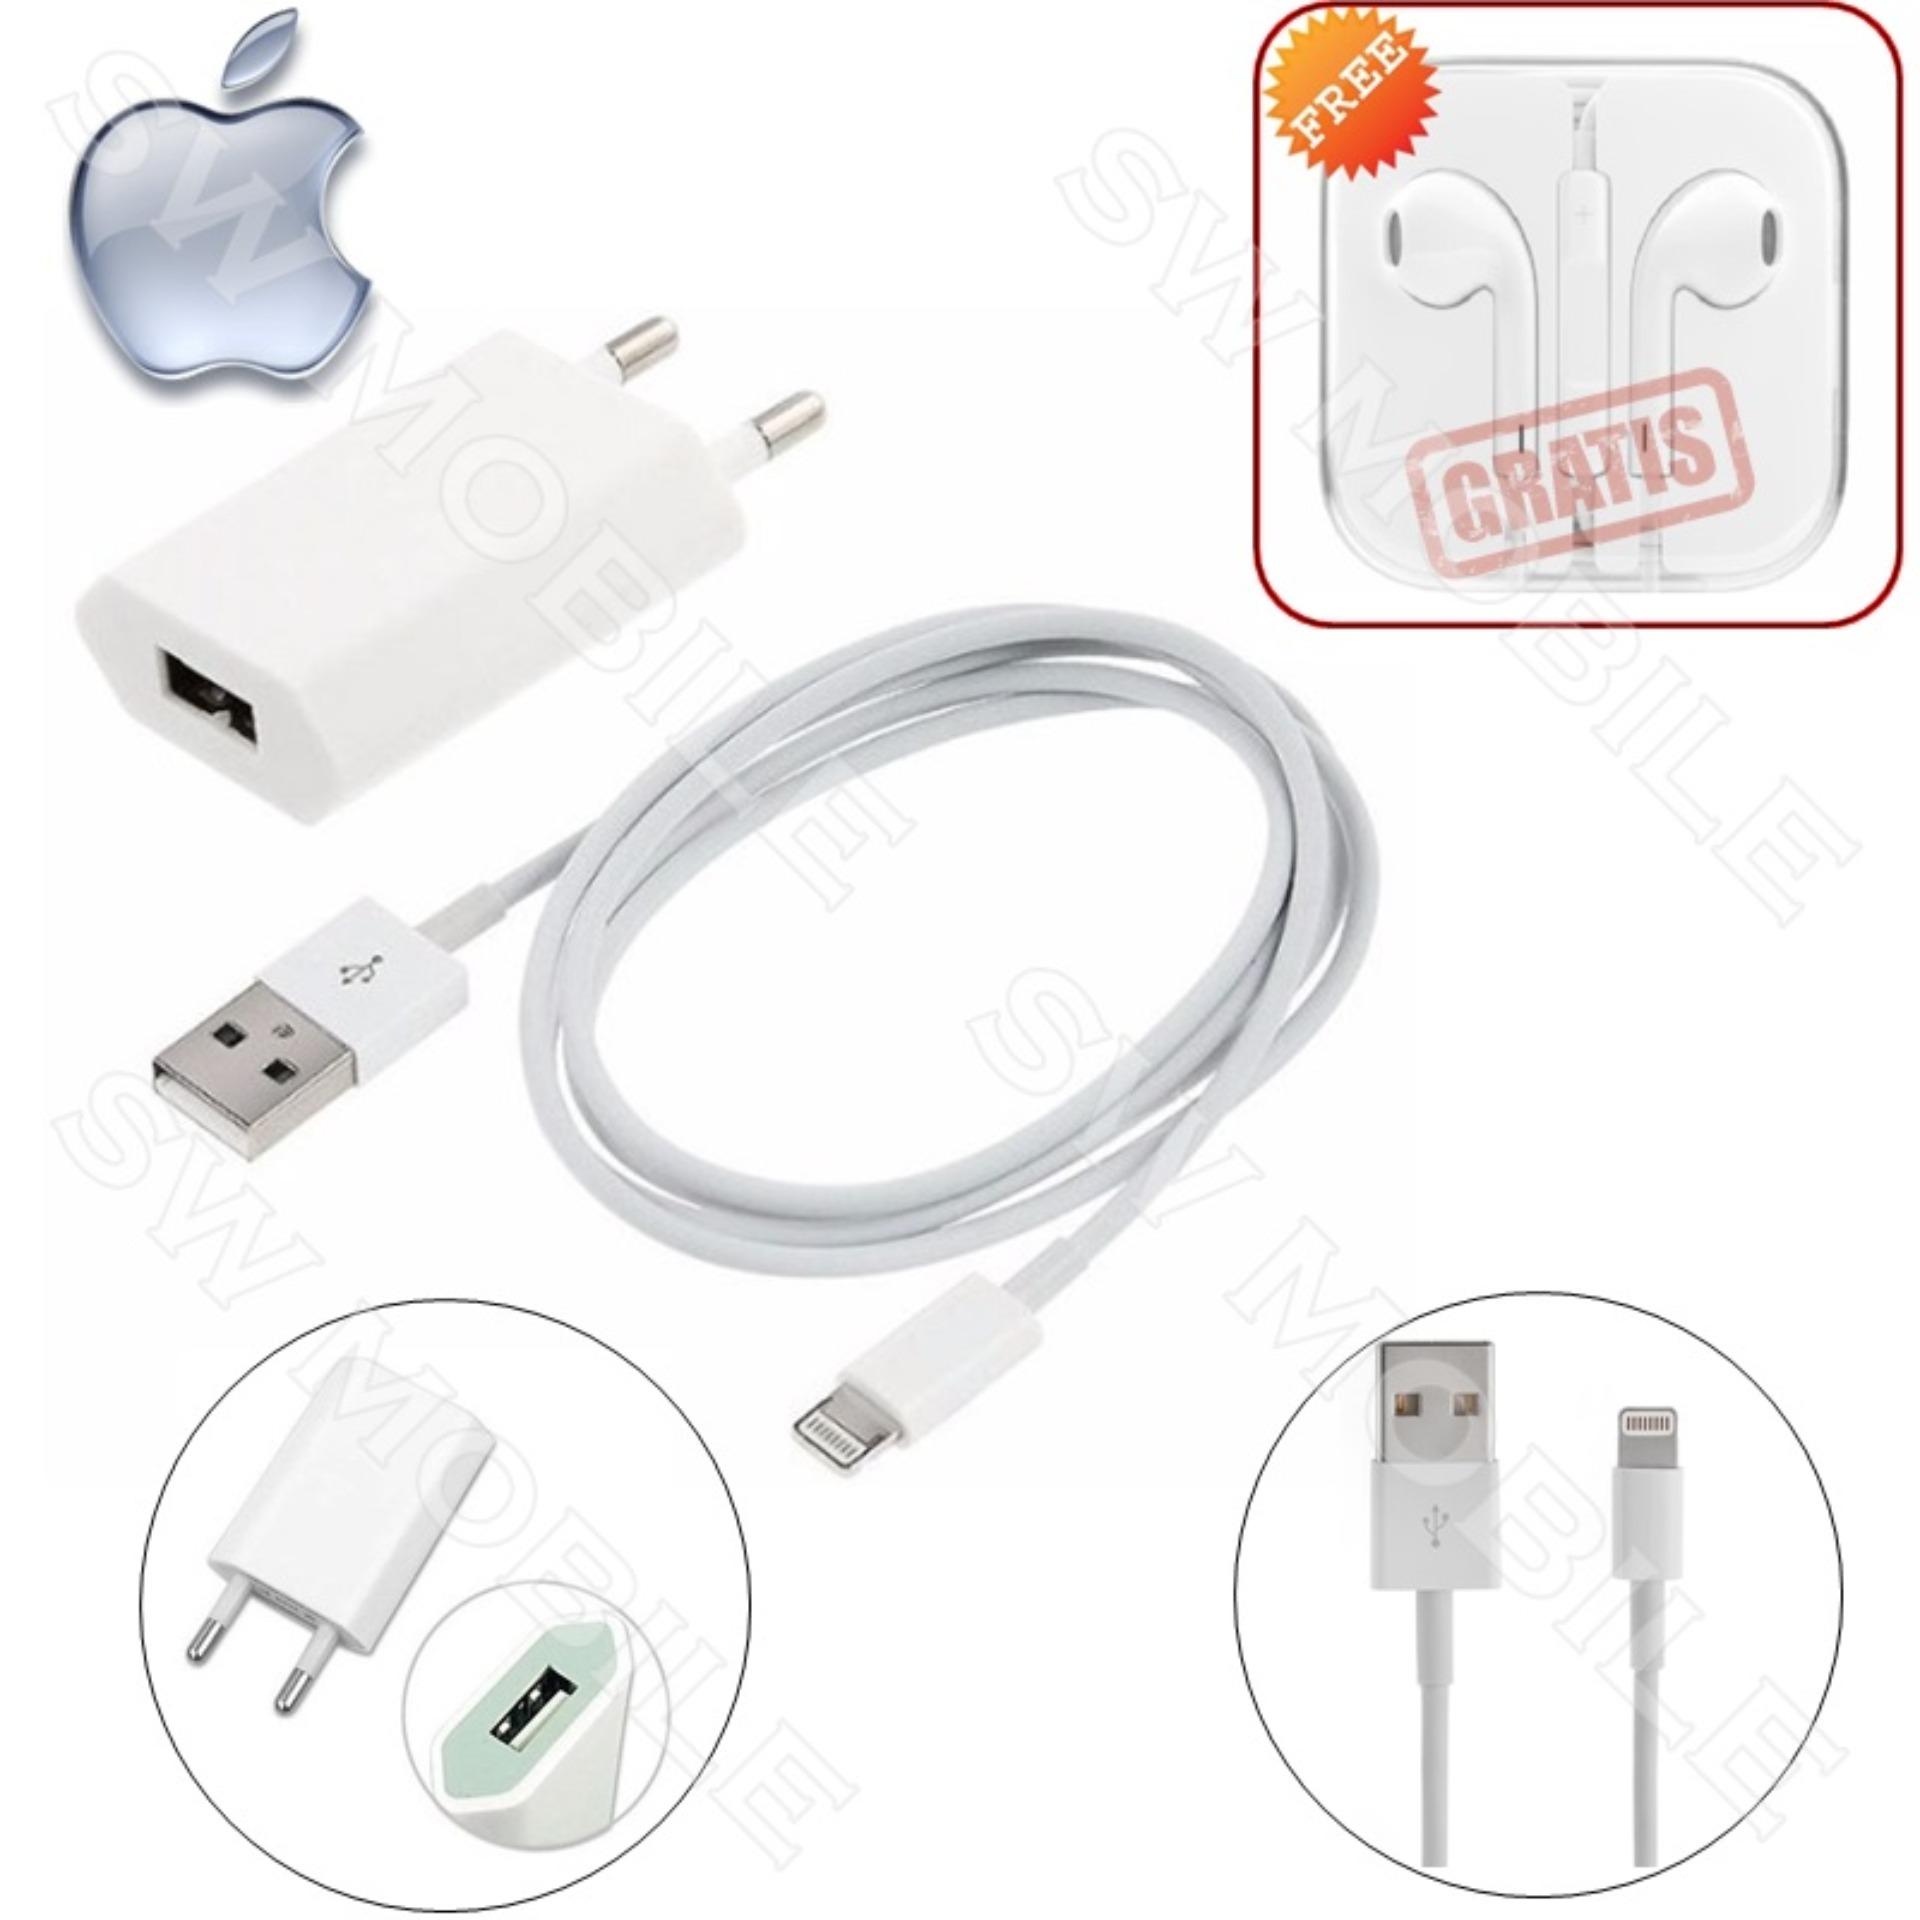 Travel Charger Lightning Compatible for iPhone 5 / 5s / 6 / 6s - Putih + FREE Handsfree for iPhone